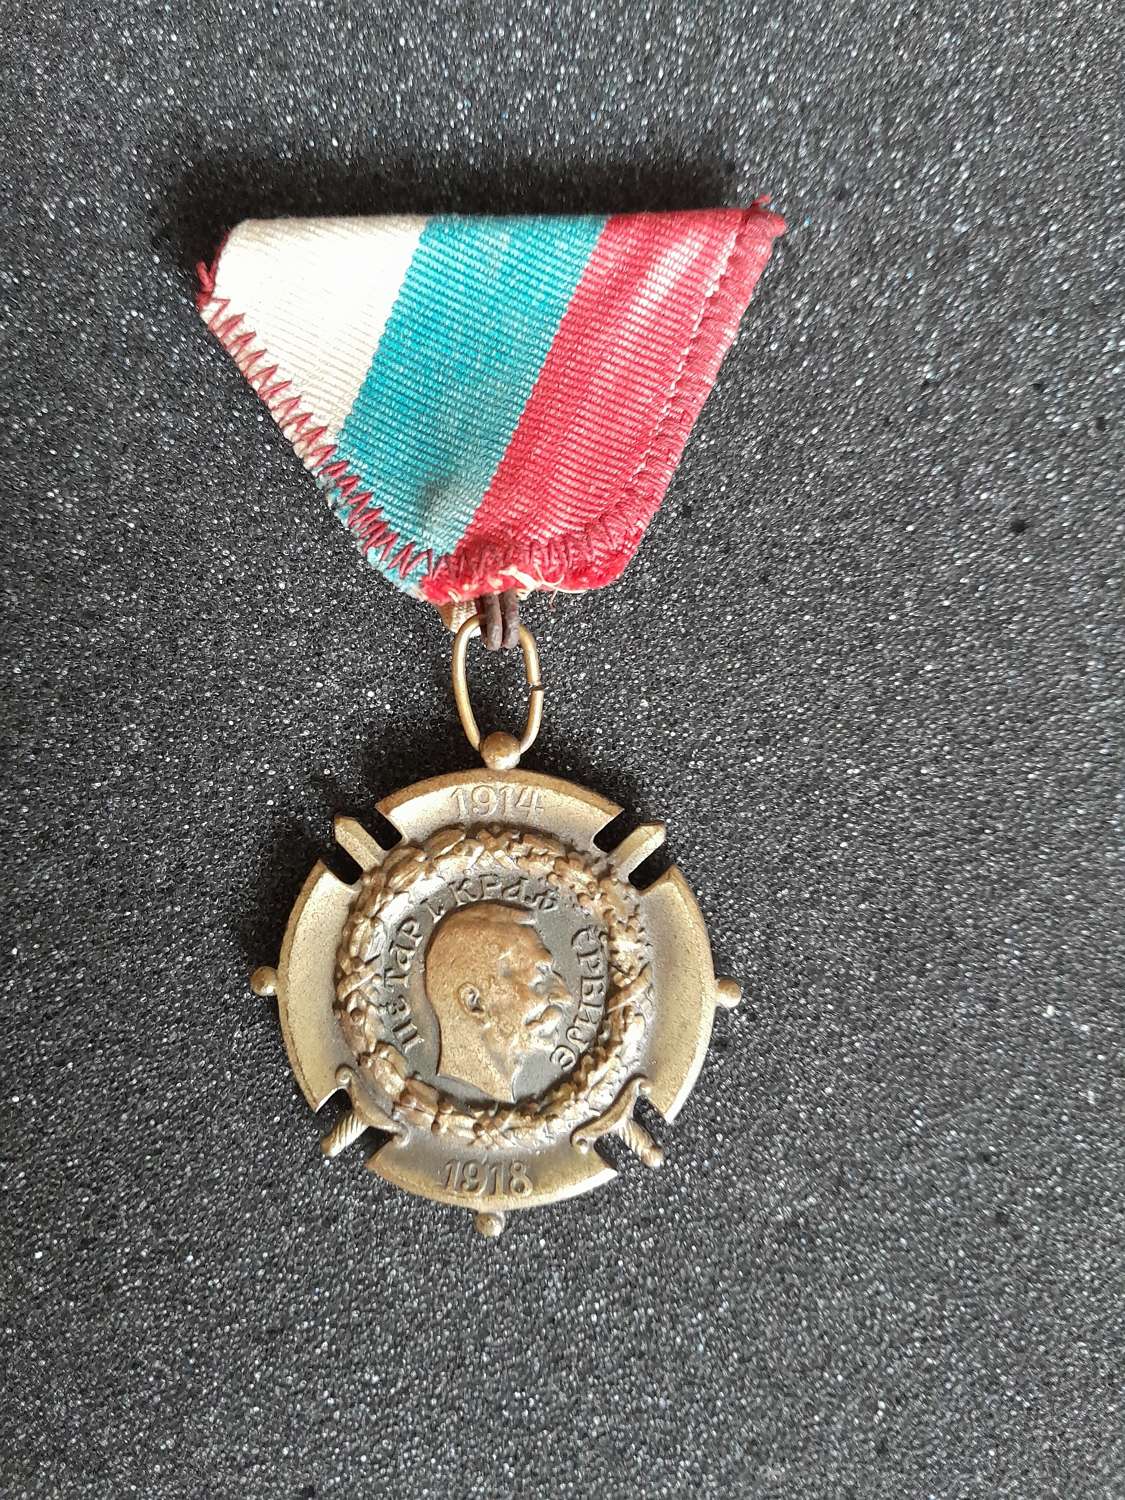 Serbian Commemorative Medal For the Great War 1914 - 1918